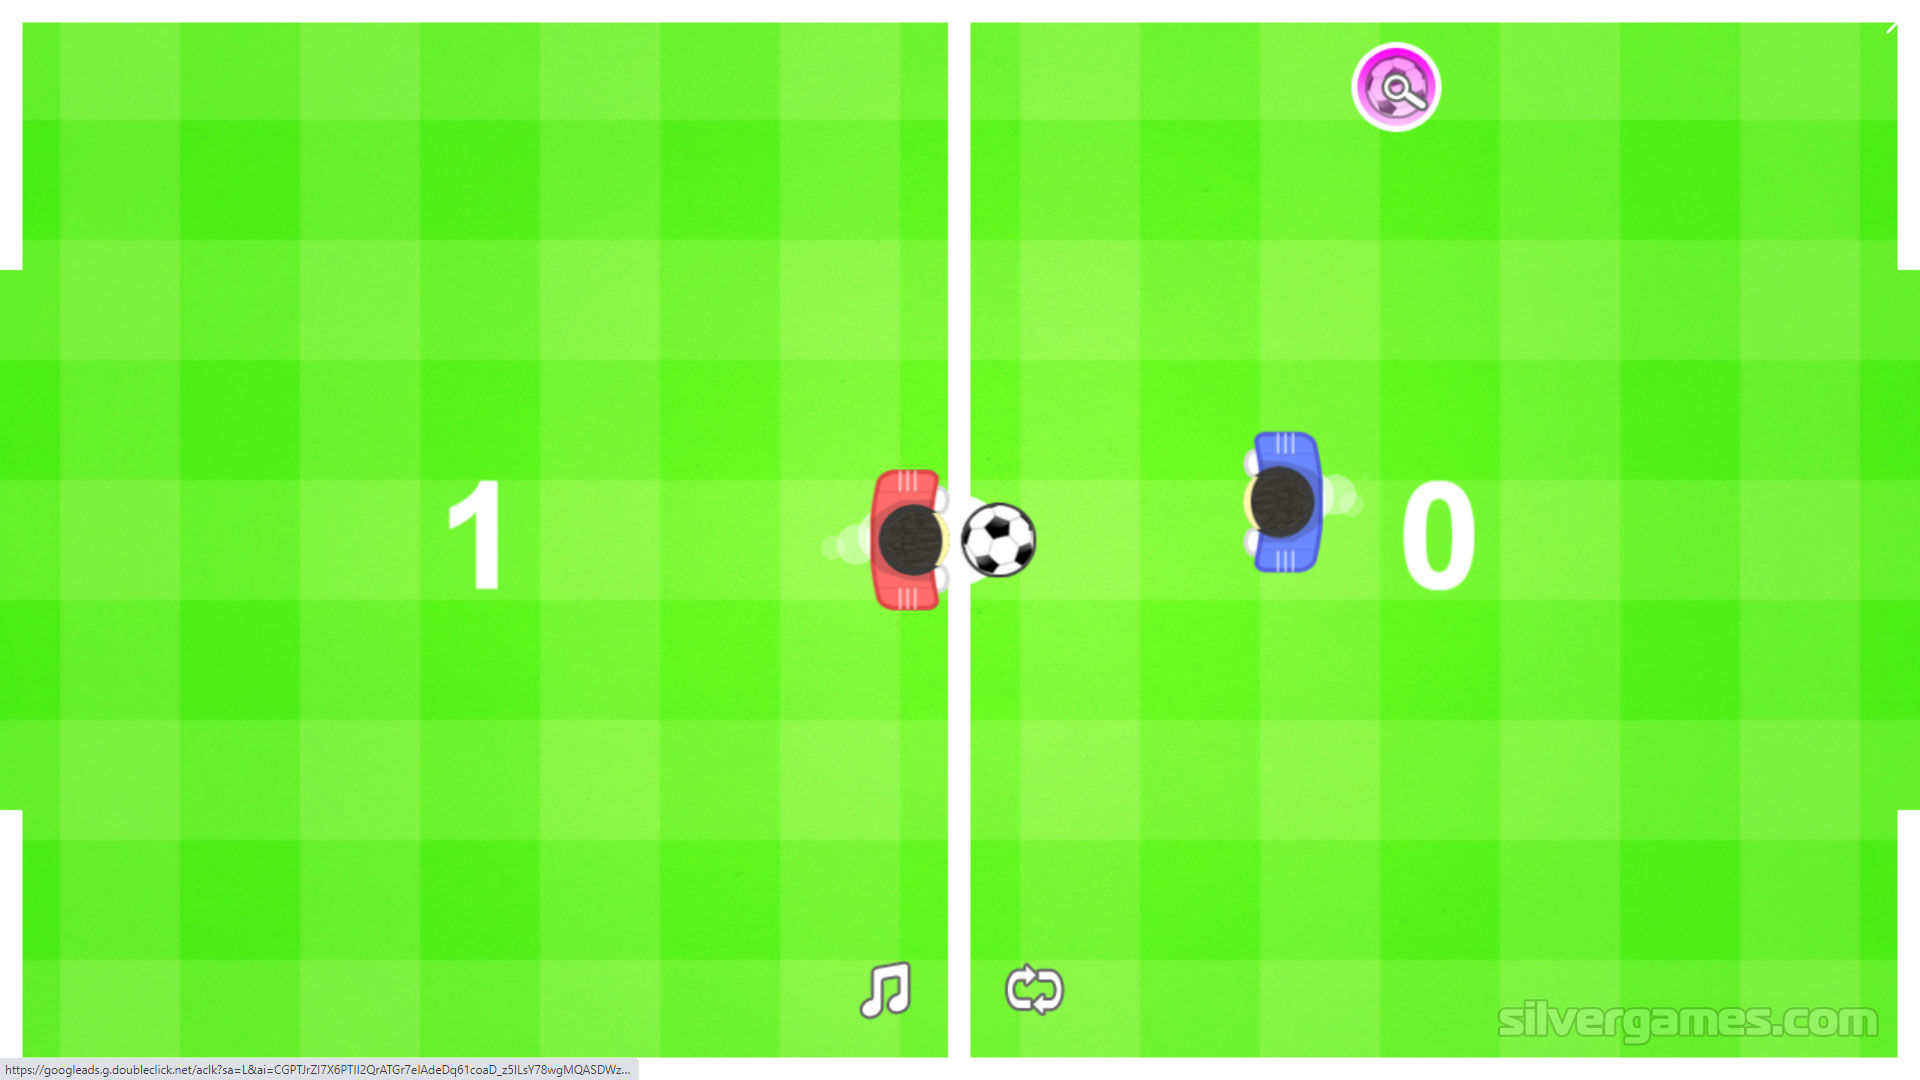 Two Player Games on X: 1 on 1 Soccer Game - PLAY NOW! 👇 https